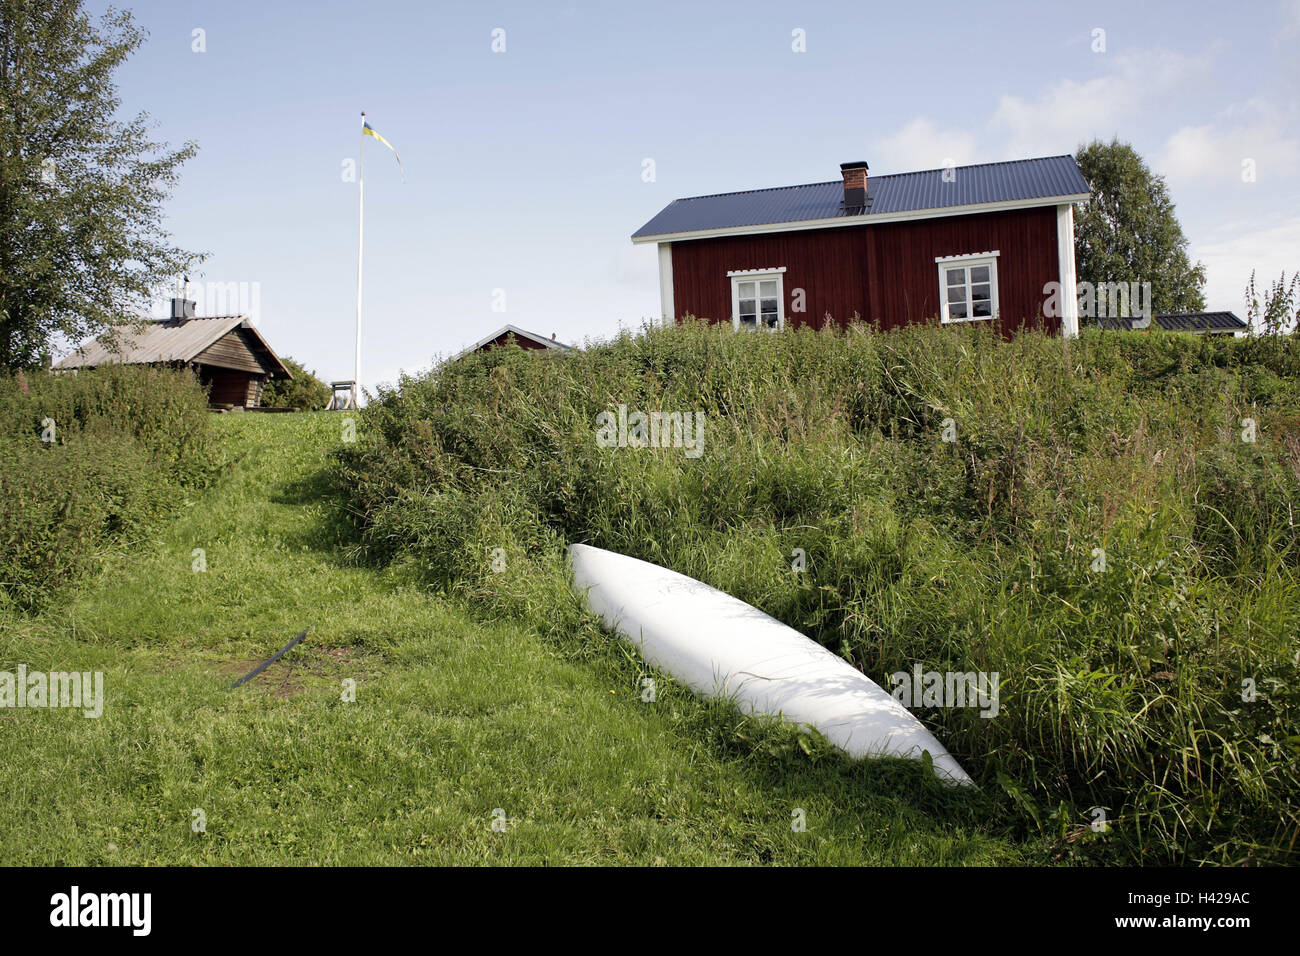 Sweden, Norrland, Norrbotten, timber houses, canoe, Scandinavia, polar circle, meadows, rurally, remotely, shrubs, houses, timber-frame construction way, architecture, typically, typically for country, deserted, neighborhood, red, flag, flagpole, boot, Stock Photo